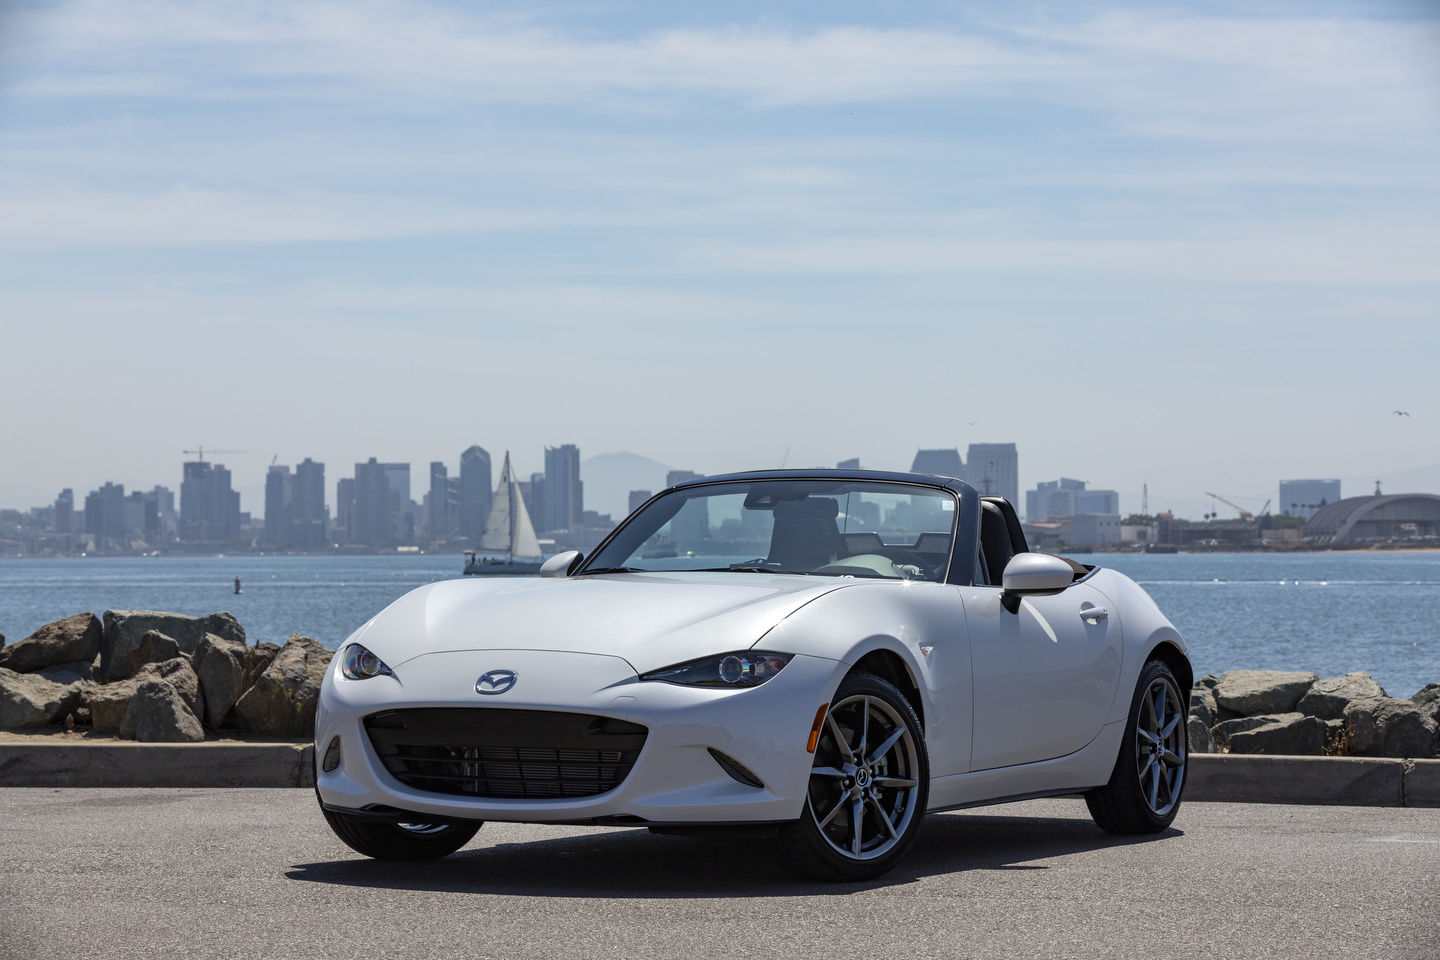 What Makes the 2022 Mazda MX-5 a Great Sports Car